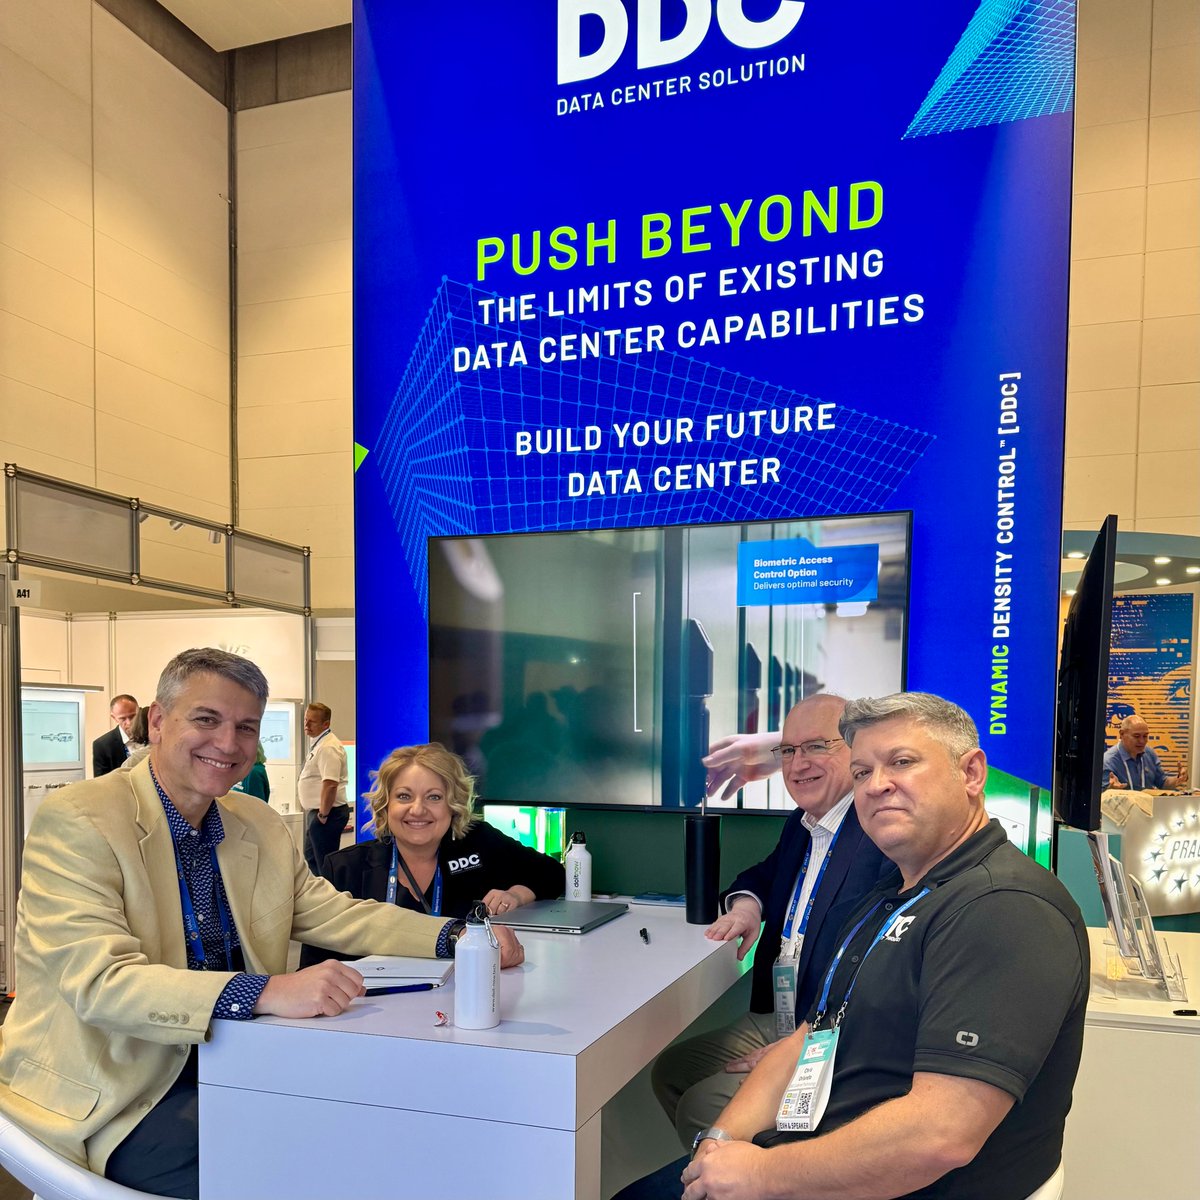 Having great conversations at #ISC2024 with top analysts like @Intersect360! Visit Stand A24 to explore the future of #datacenters with our modular approach. Build like Legos—efficiently and without the upfront costs. Expand as you grow and save big on time and money! #ISC24